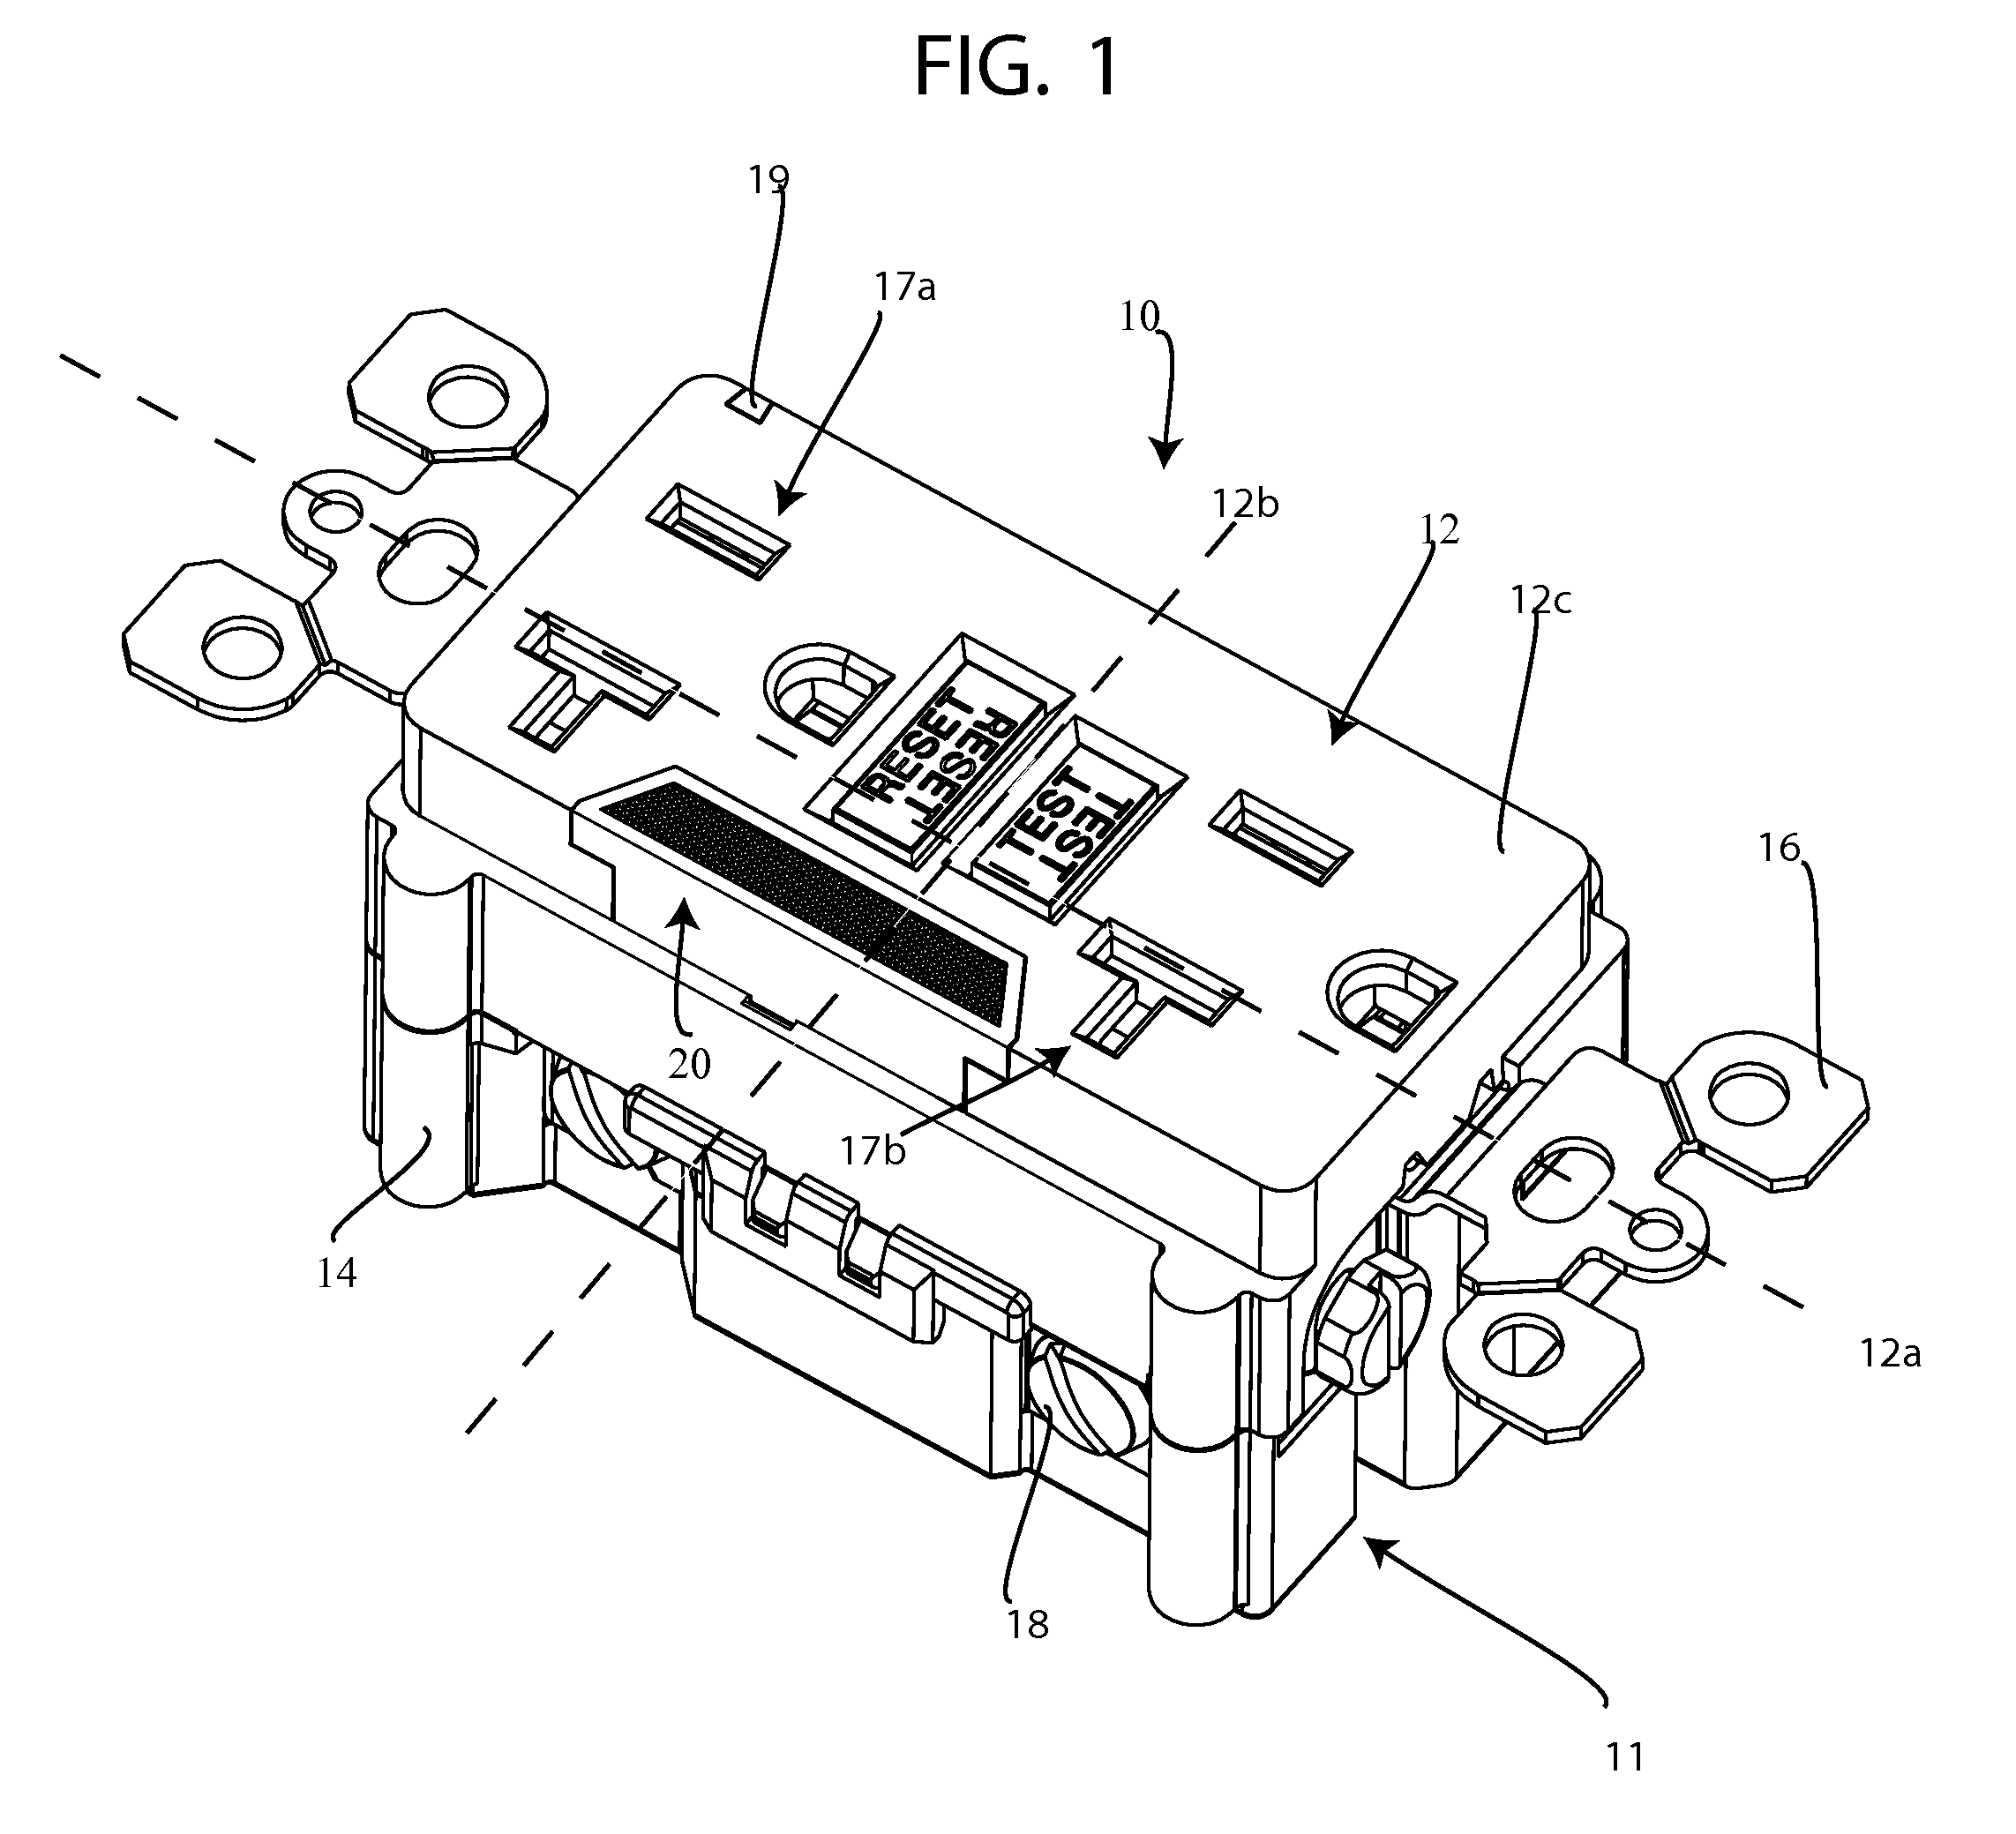 Combination device including a guide light and an electrical component